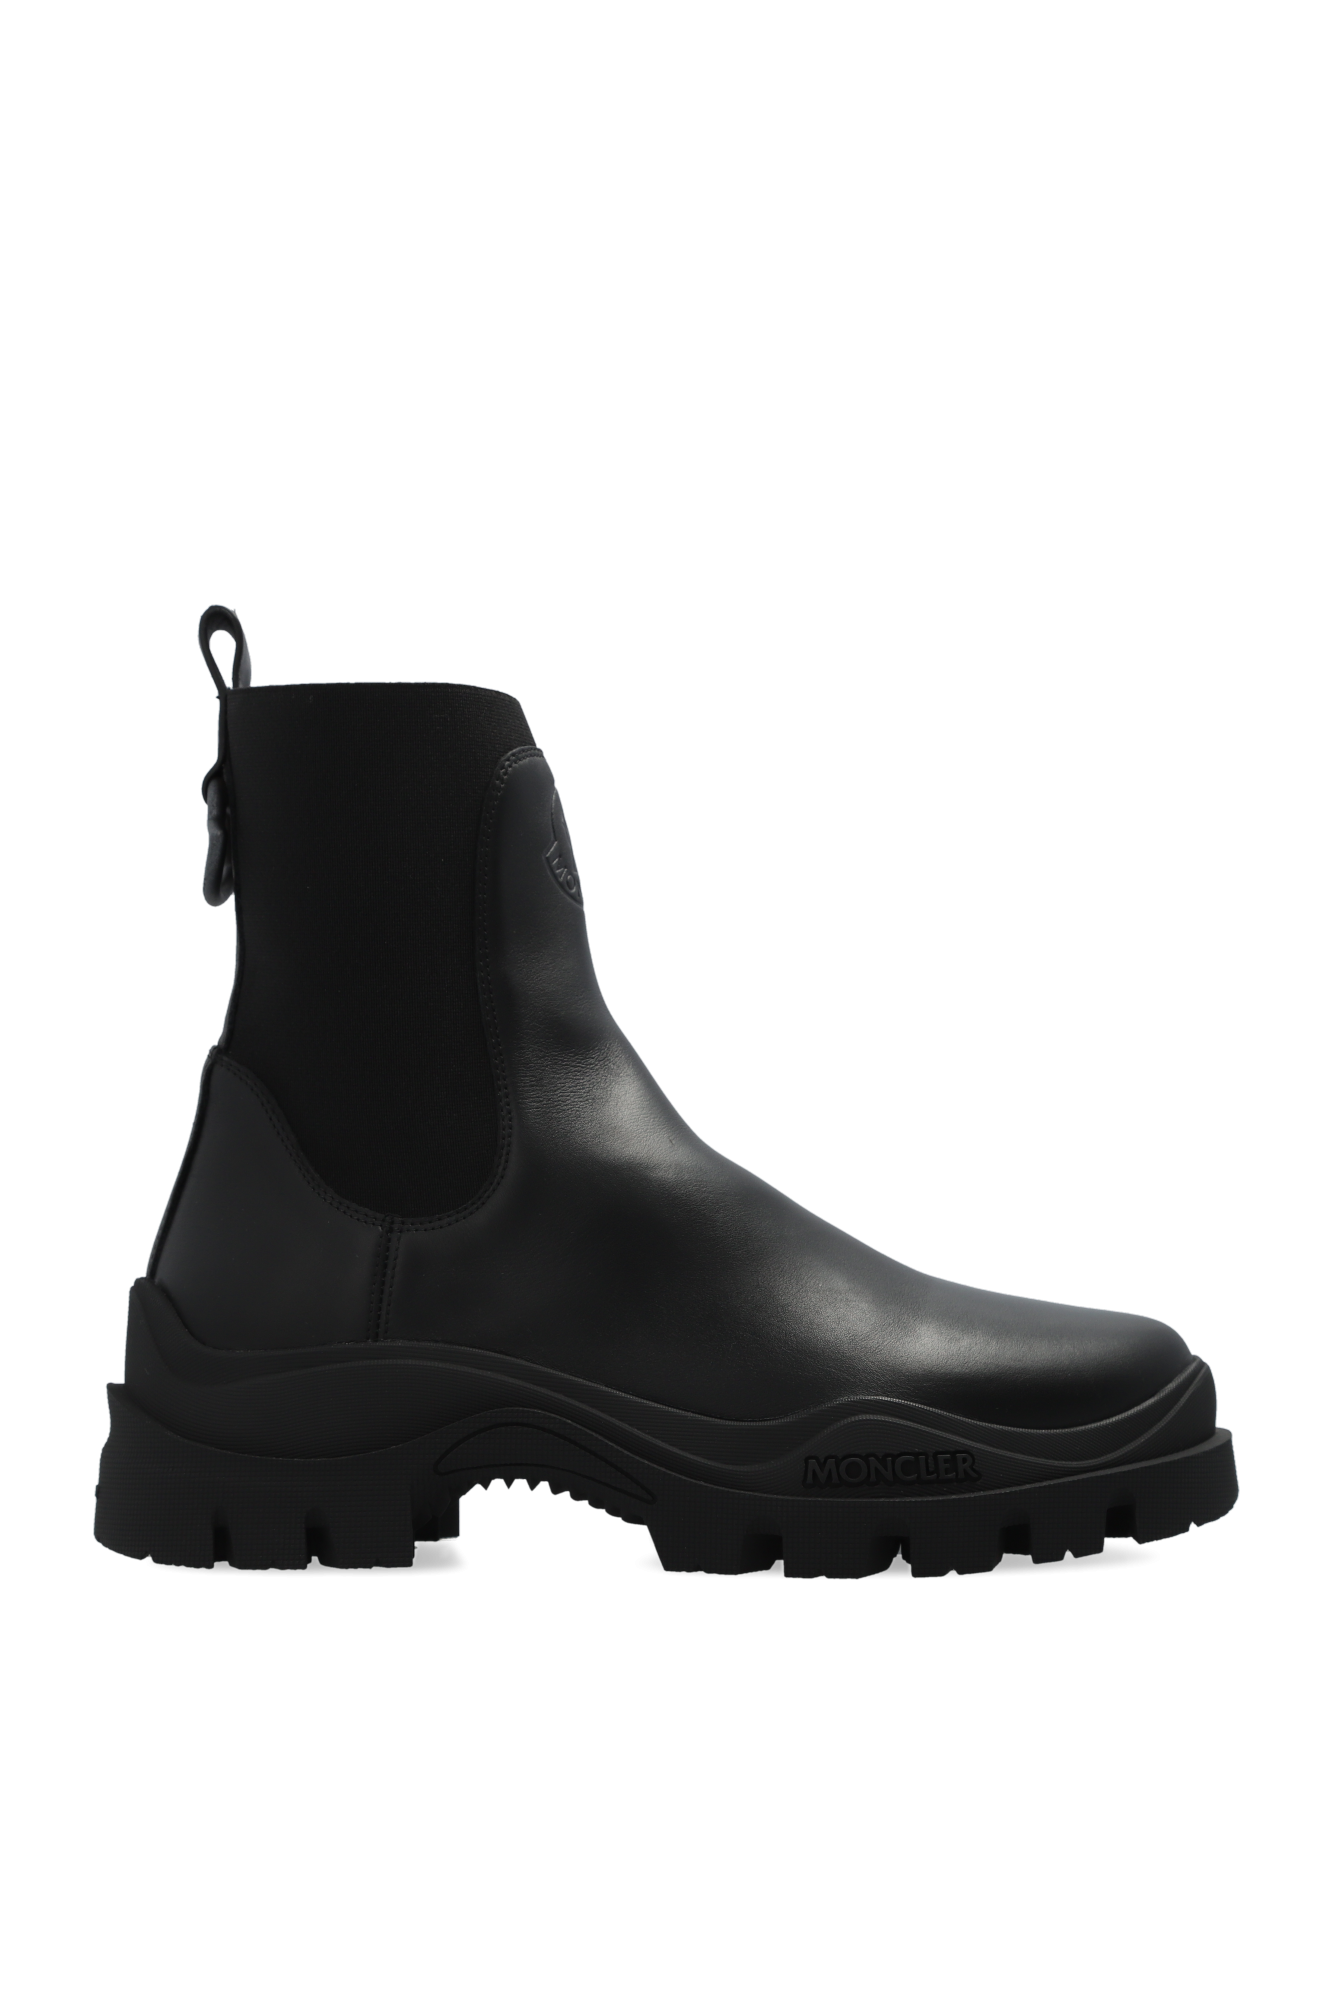 Moncler ‘Larue’ Chelsea boots in leather